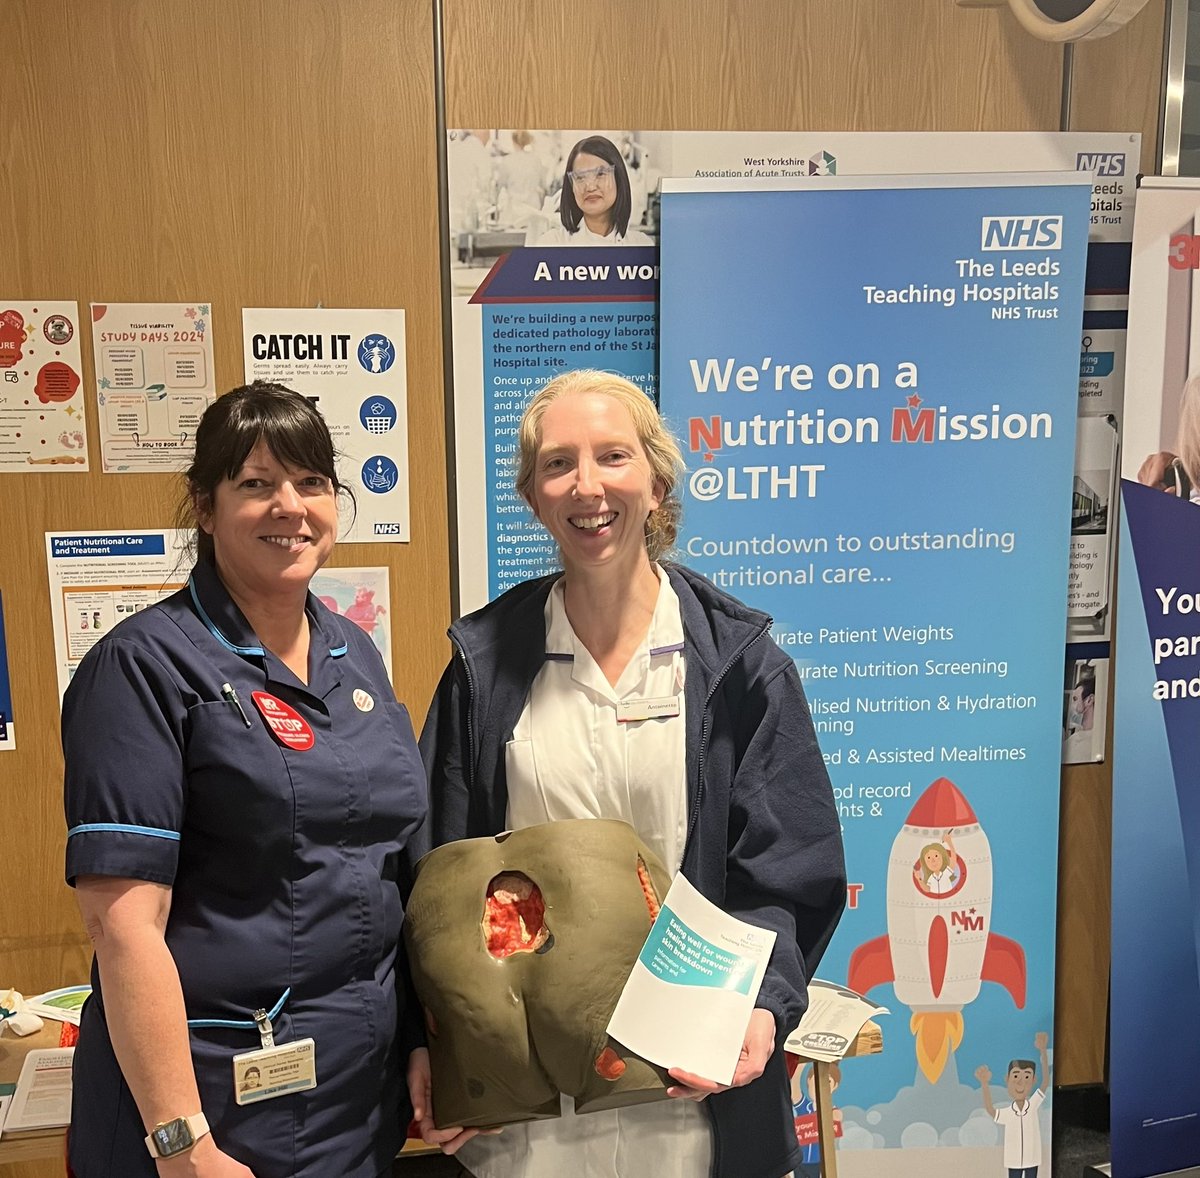 Promoting #nutritionmission with @LTHTdietetics as part of #stopthepressure 🛑🥗Thankyou to Jemma, Claudia, Ellie, Emily and Antoinette to supporting the campaign to reduce patient harm @LeedsHospitals